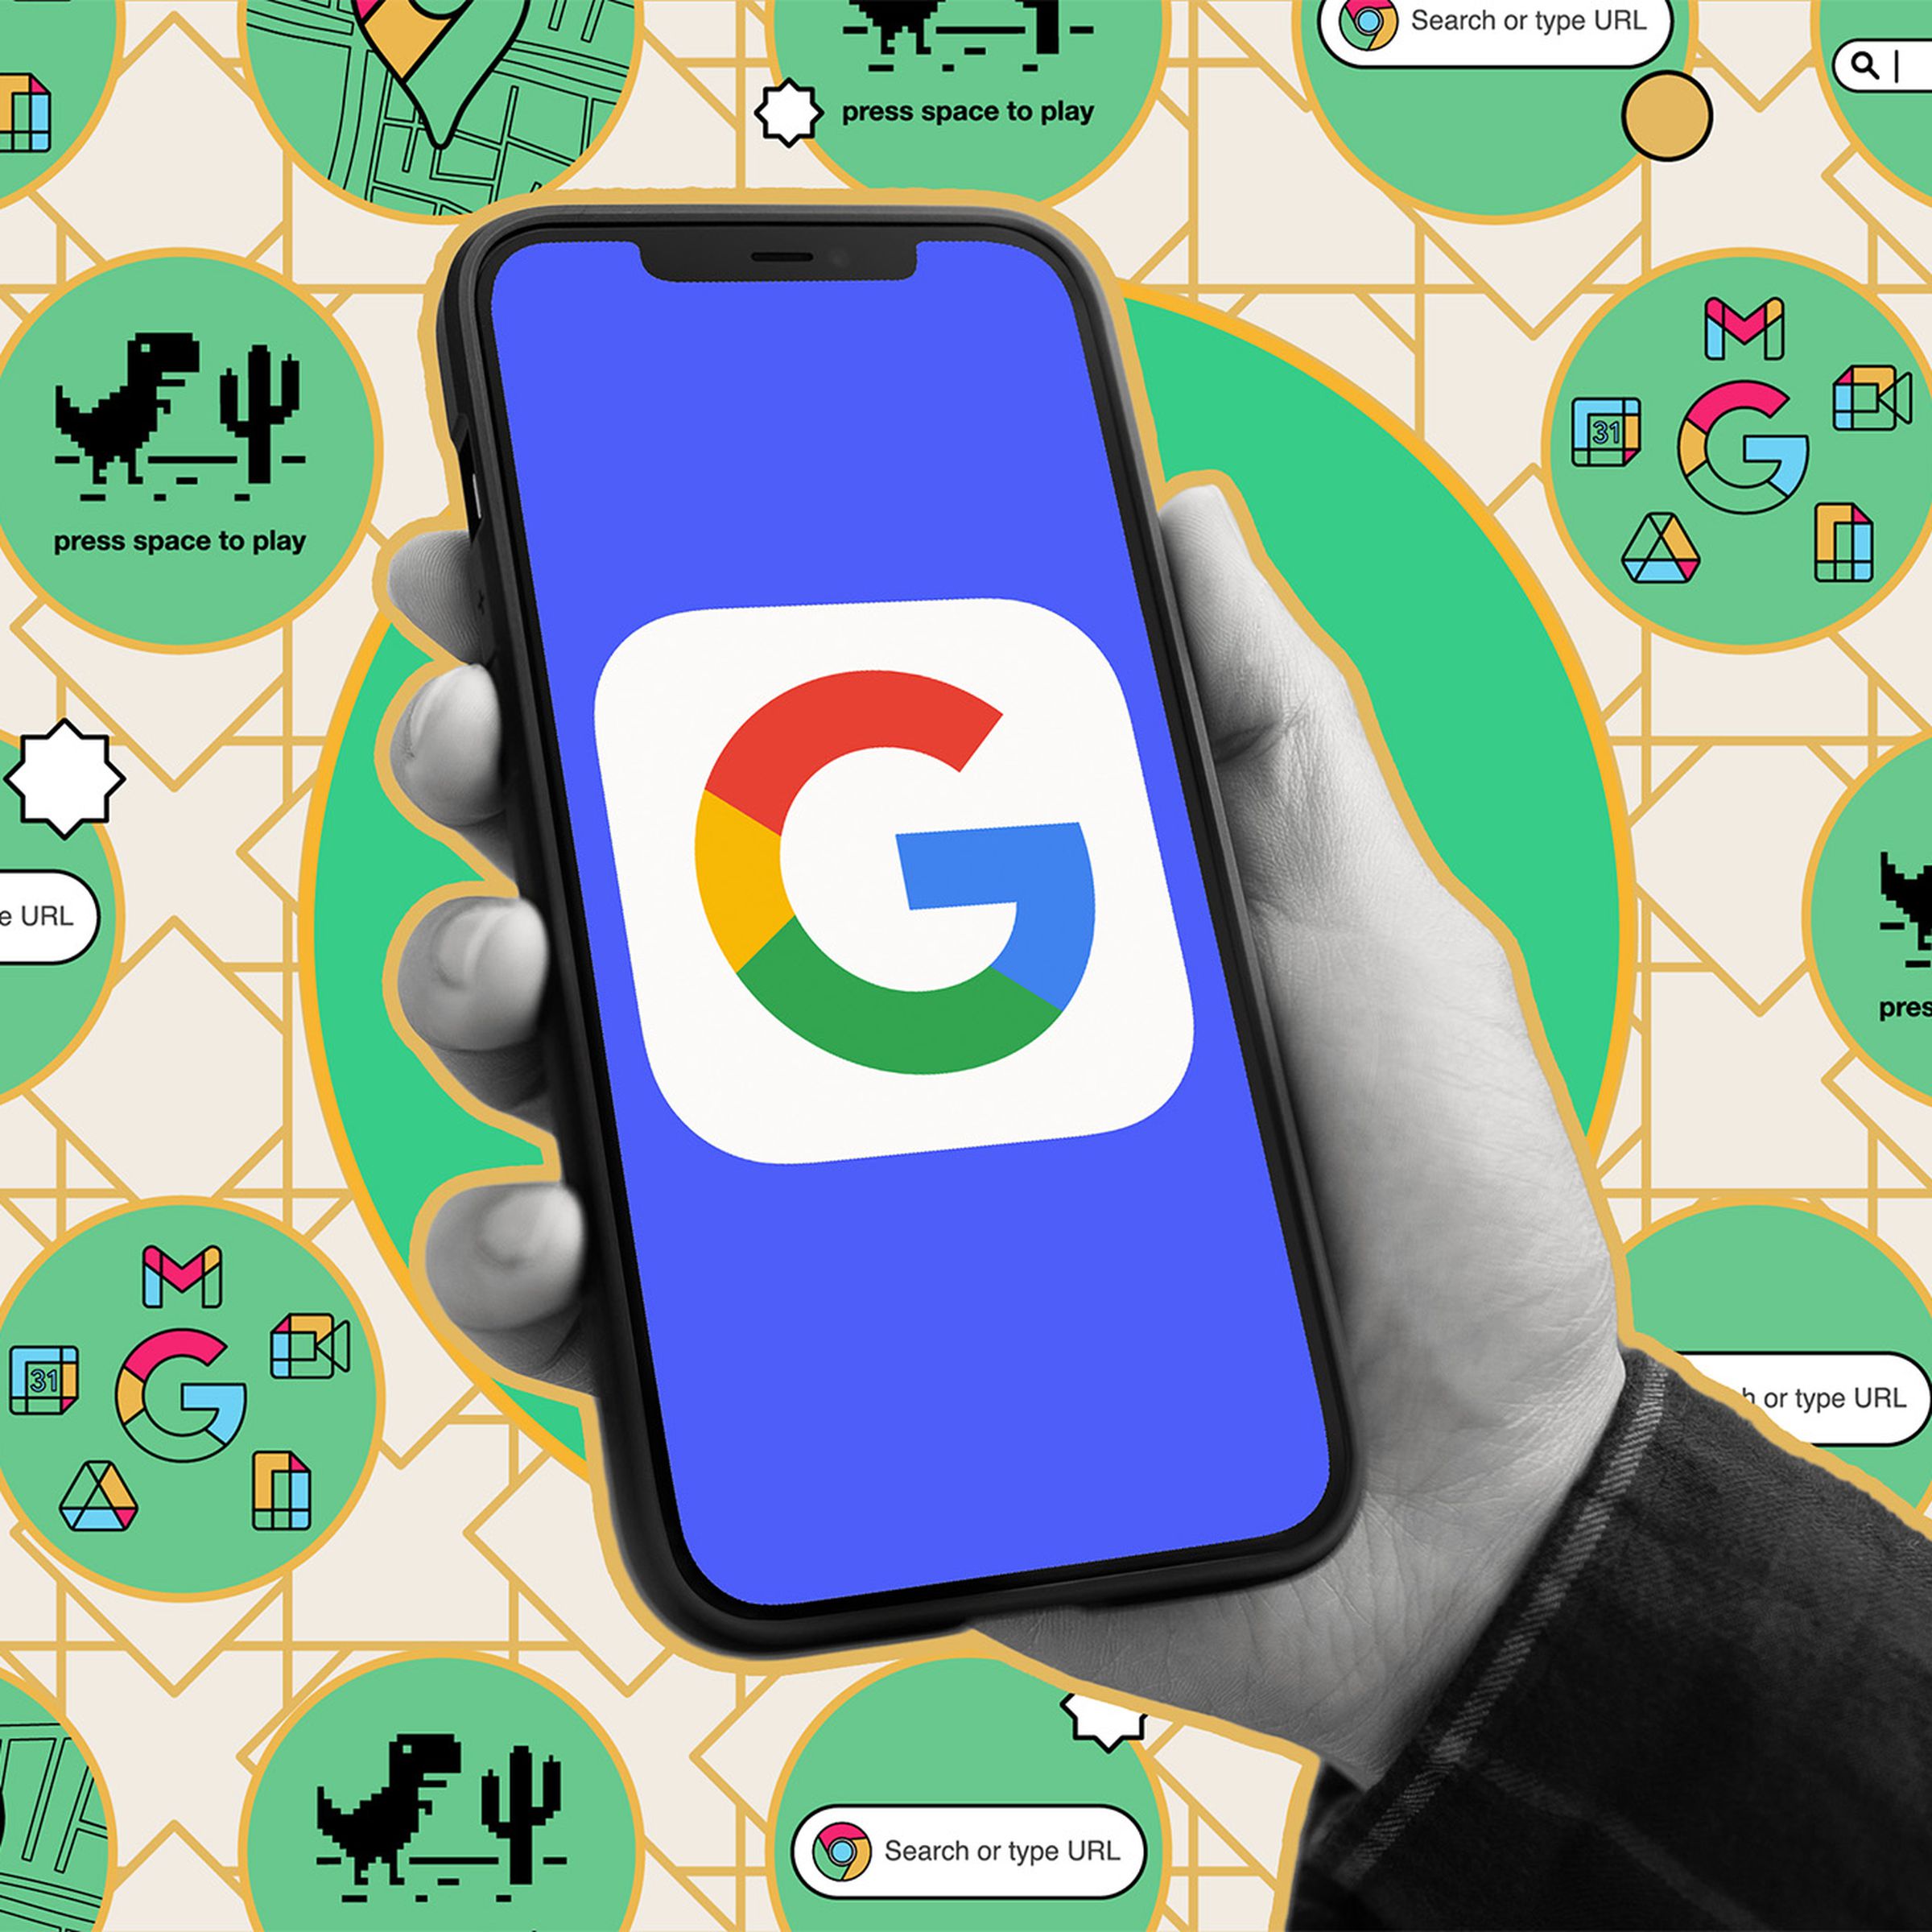 A person holding a mobile phone with the Google logo on it. The background is a mix of different Google services.